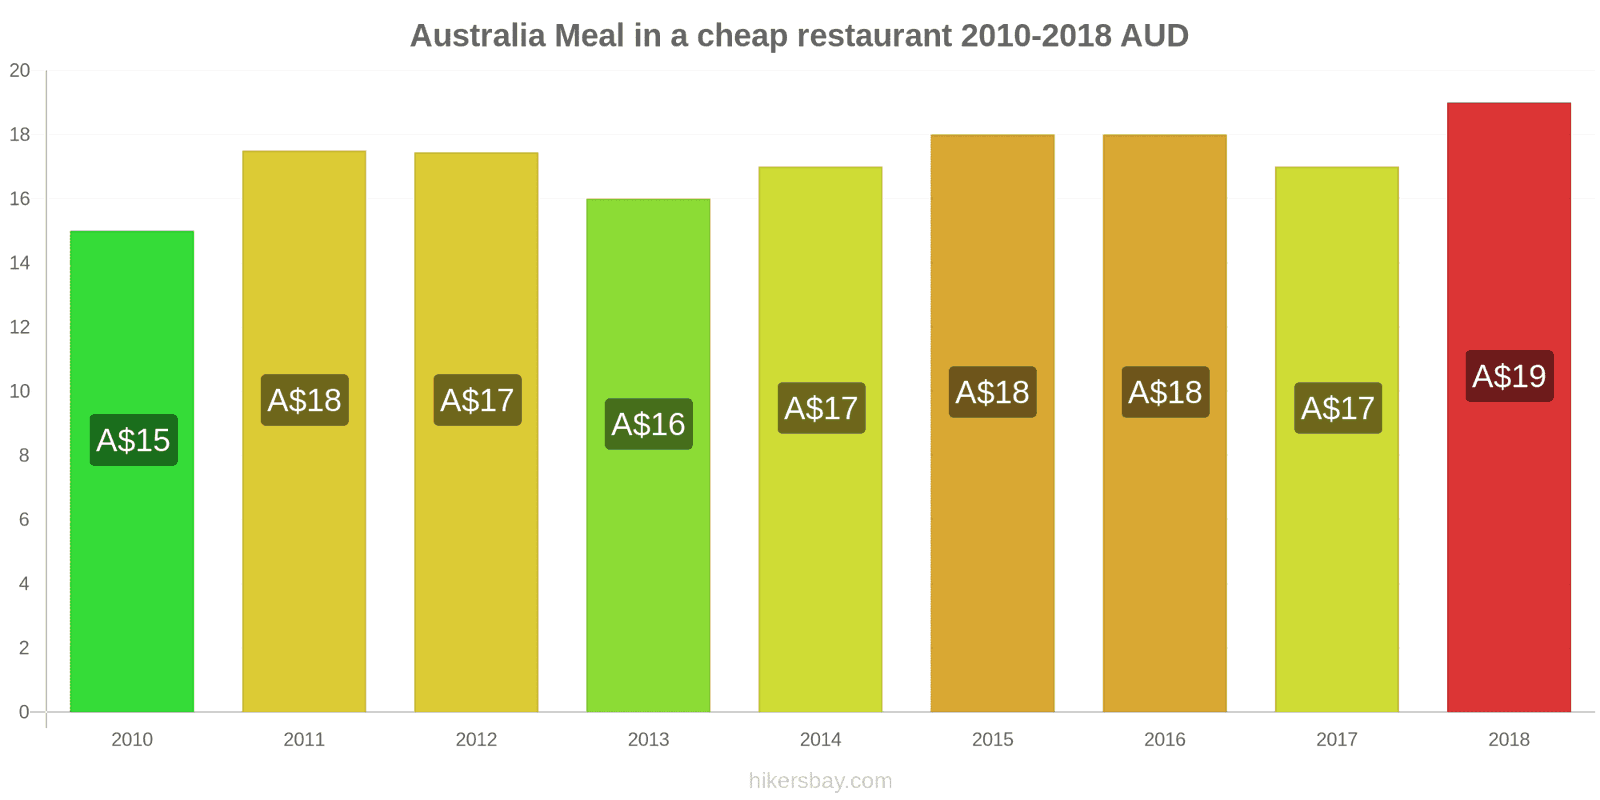 Australia price changes Meal in a cheap restaurant hikersbay.com